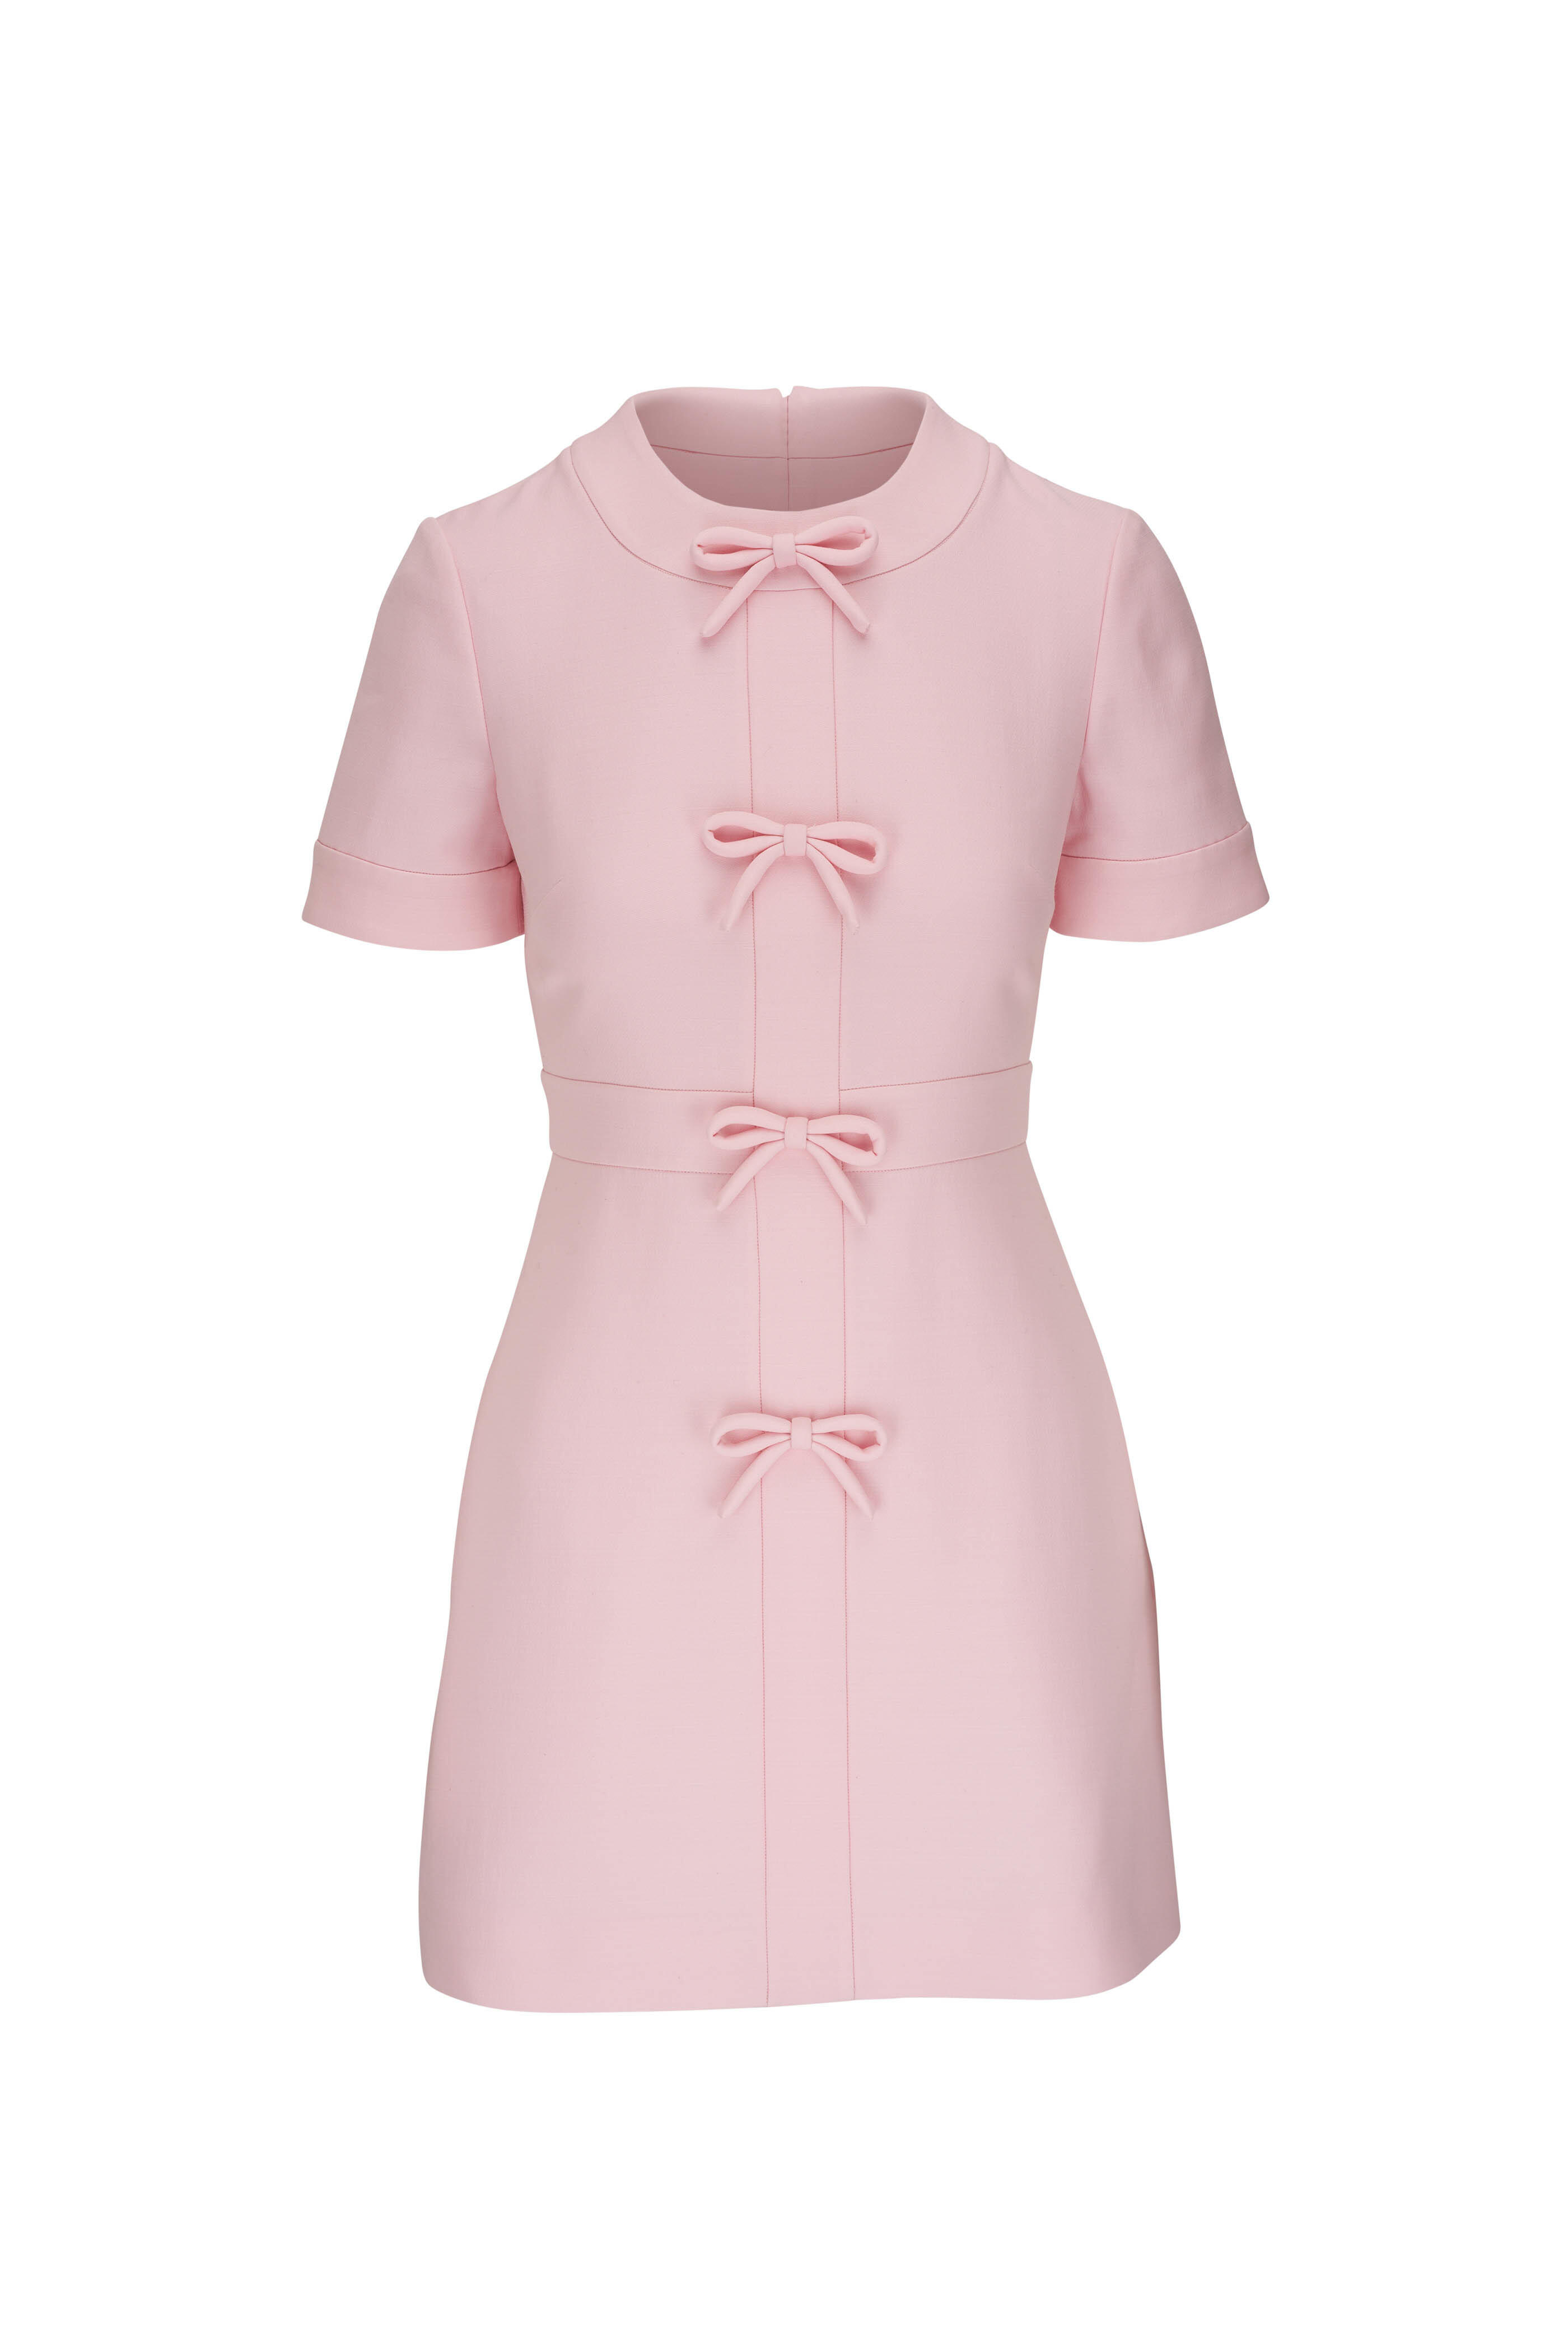 Valentino - Solid Light Pink Crepe Couture Bow Dress